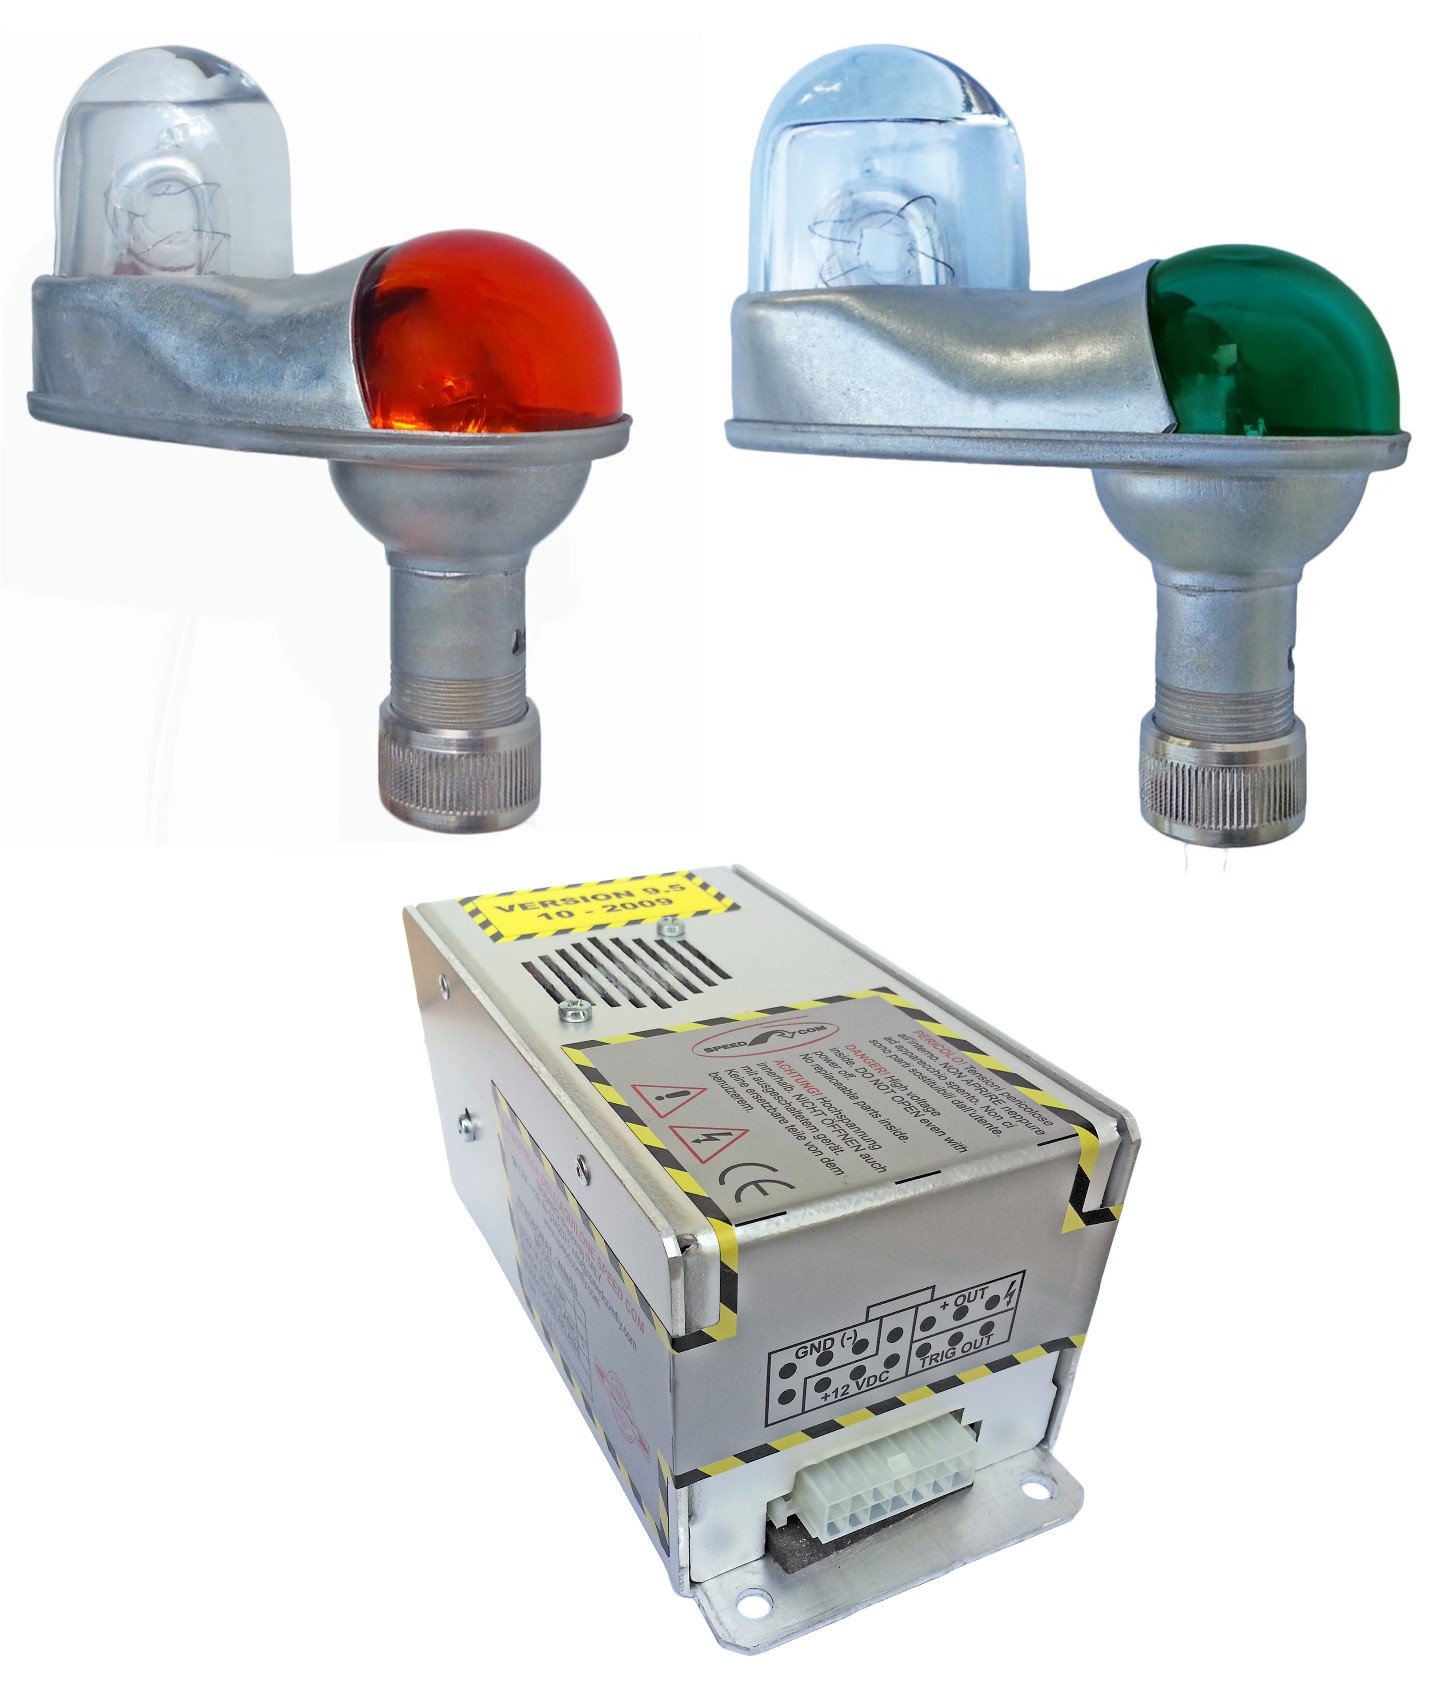 SINGLE-LAMP CONTROL UNIT KIT WITH TWO WINGED STROBE LAMPS + NAV